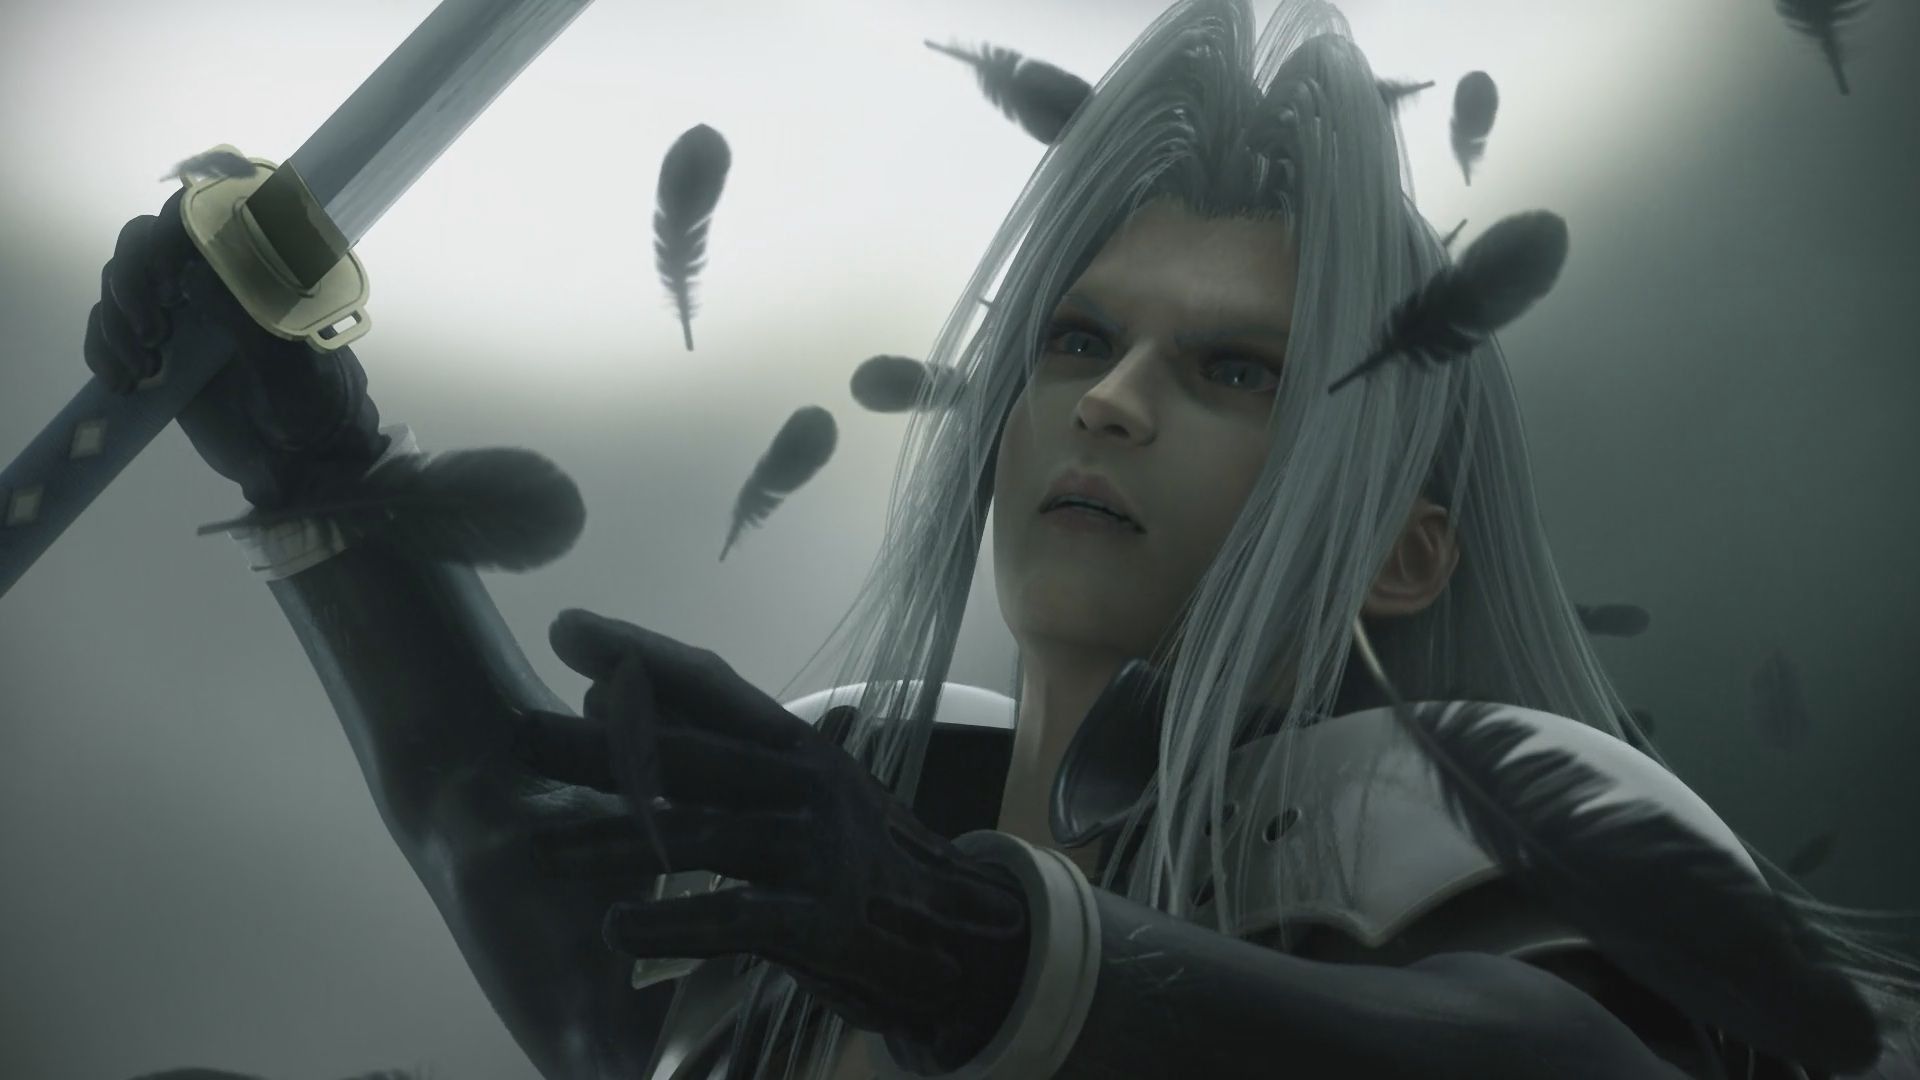 Sephiroth Wallpaper, image collections of wallpaper